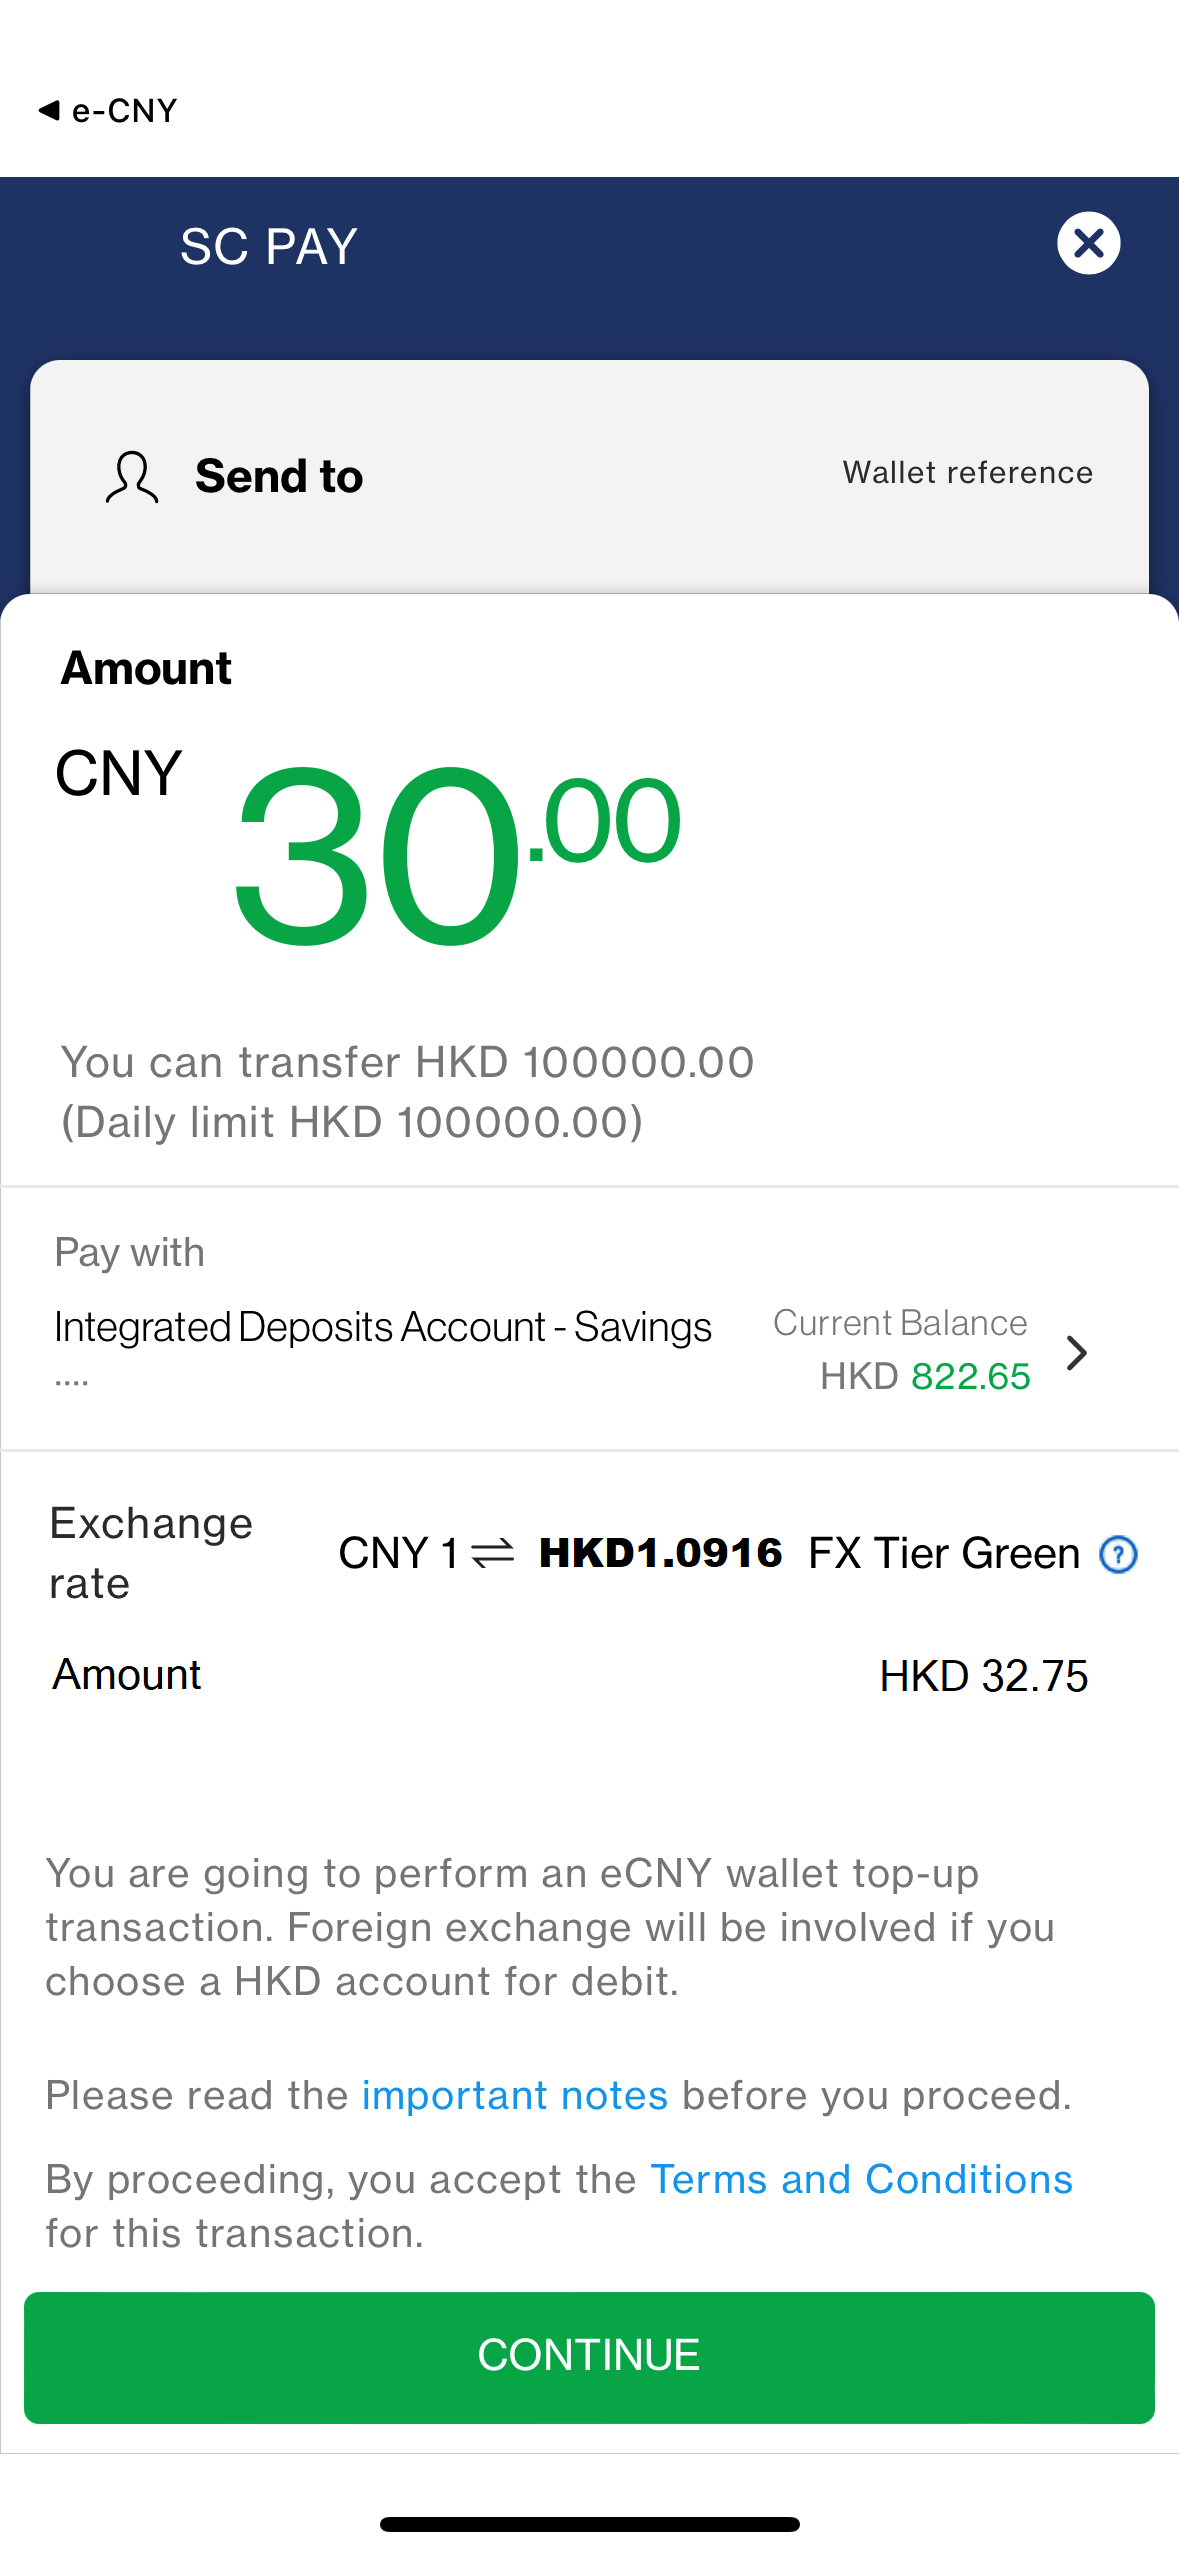 How to top up e-CNY wallet? - step 4